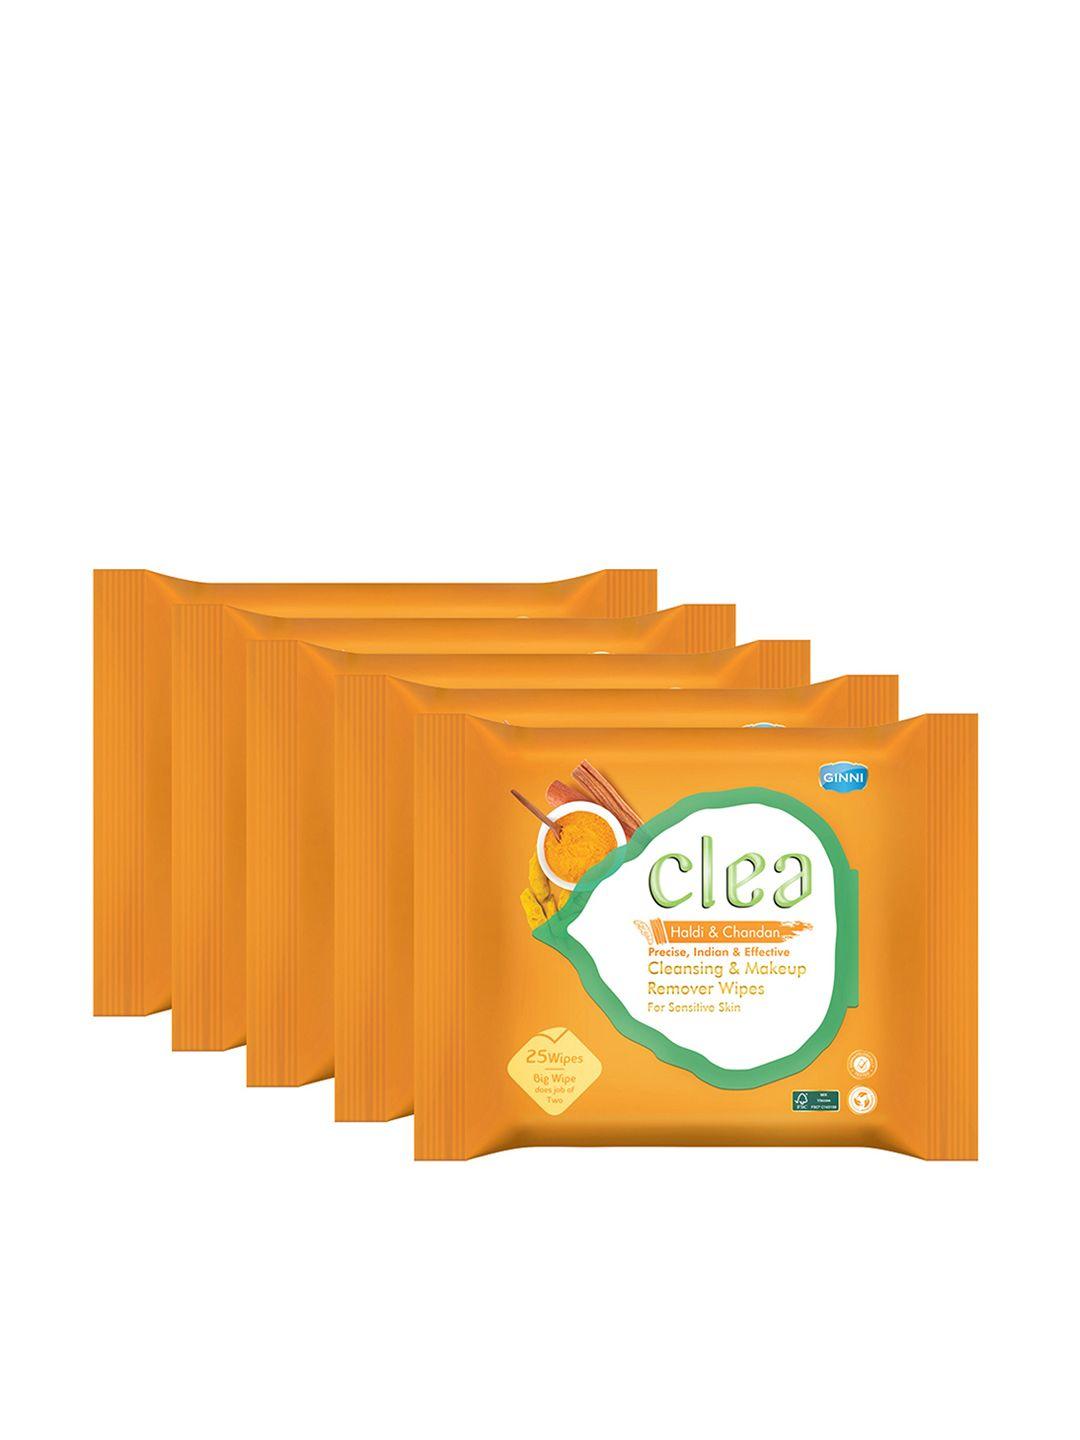 clea set of 5 haldi & chandan cleansing & makeup remover wet wipes - 25 wipes per pack)